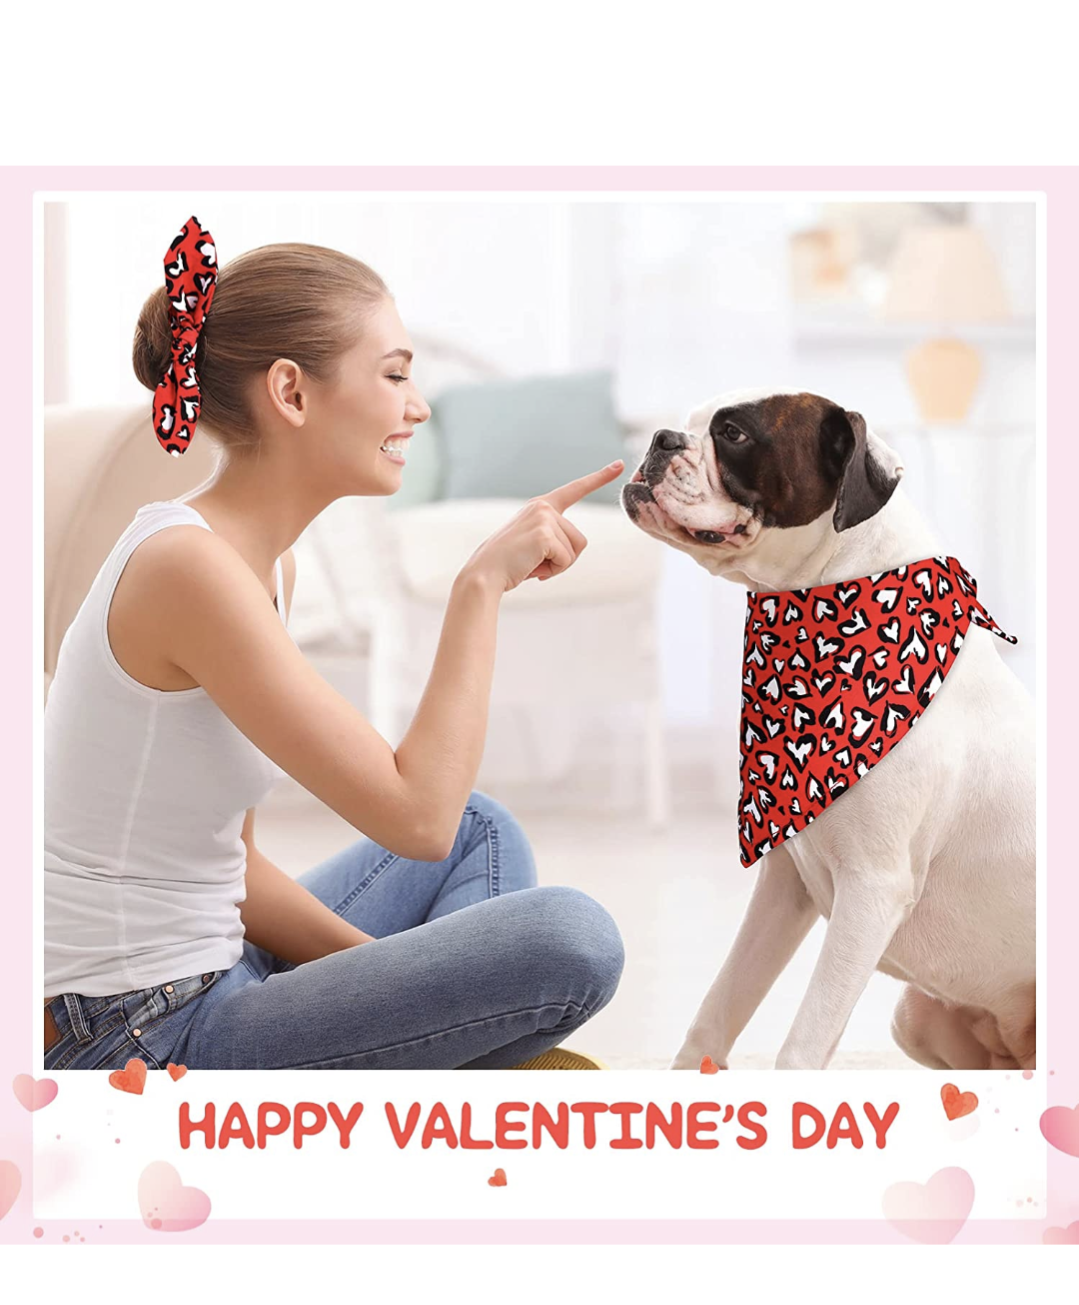 How to Spend the Best Valentine’s Day with the Real Love of Your Life (Your Pet)